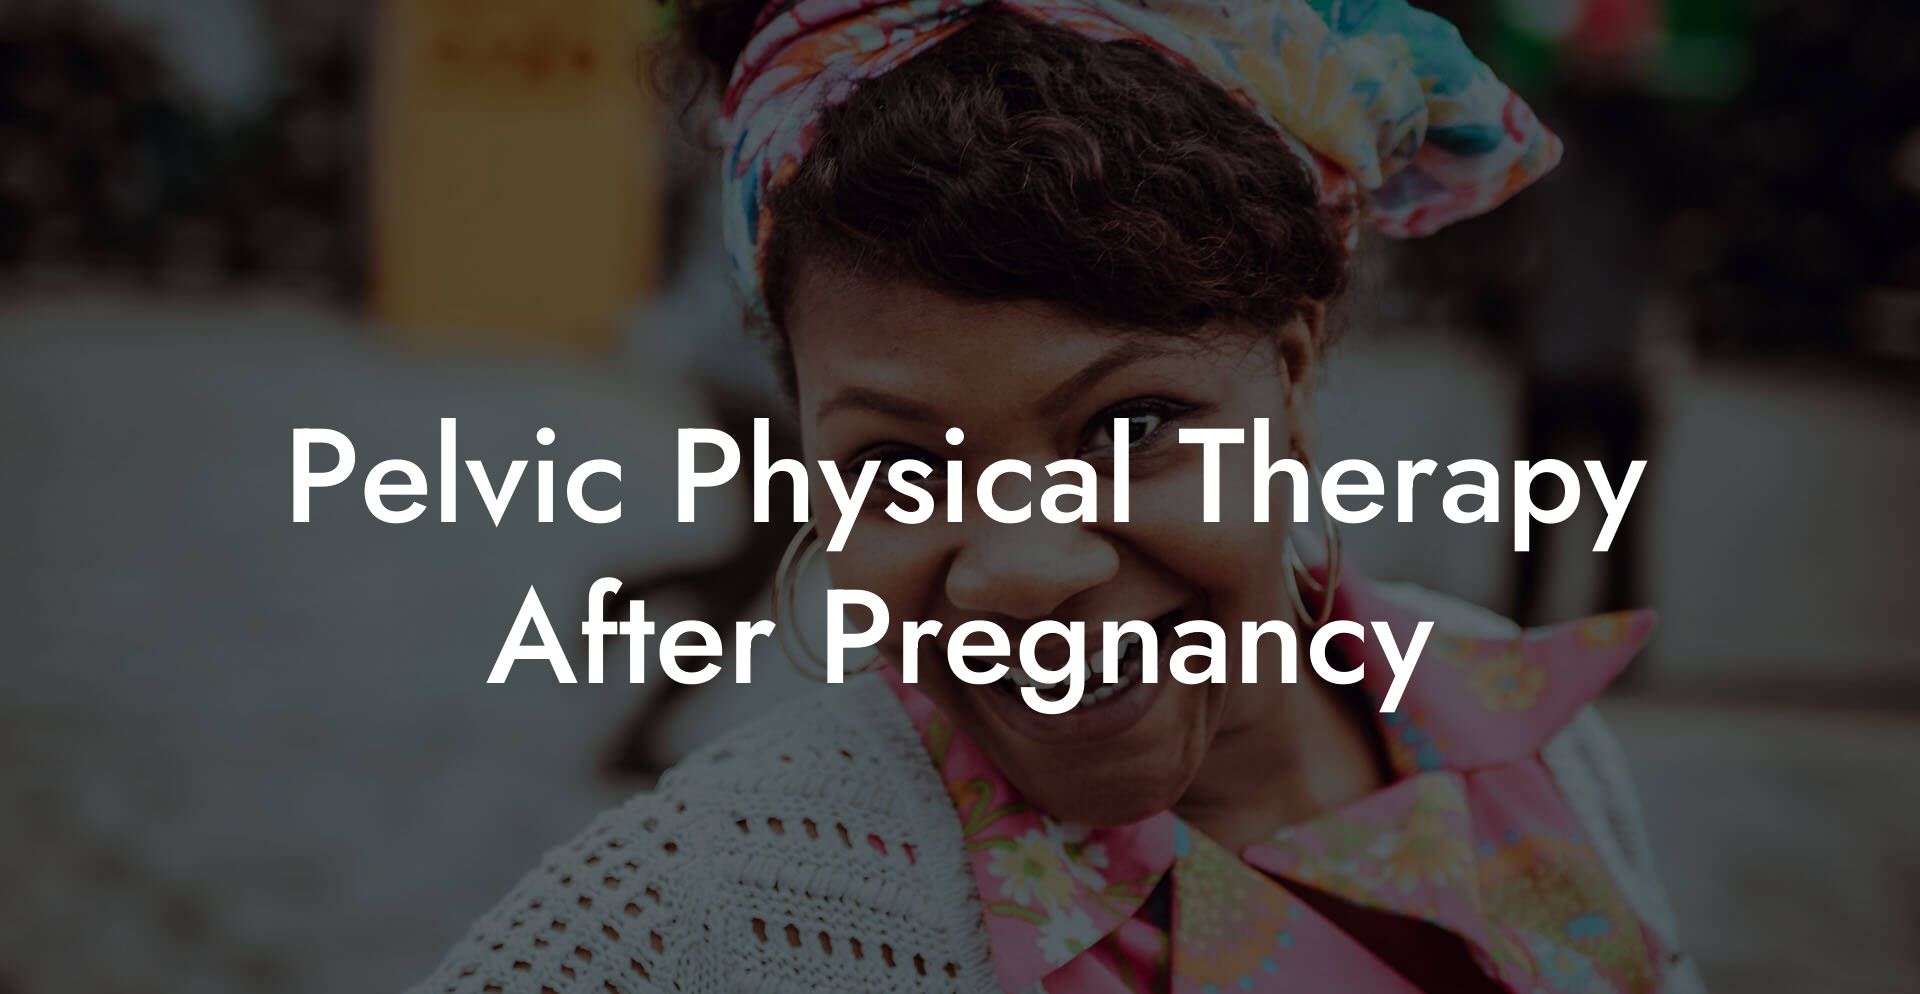 Pelvic Physical Therapy After Pregnancy